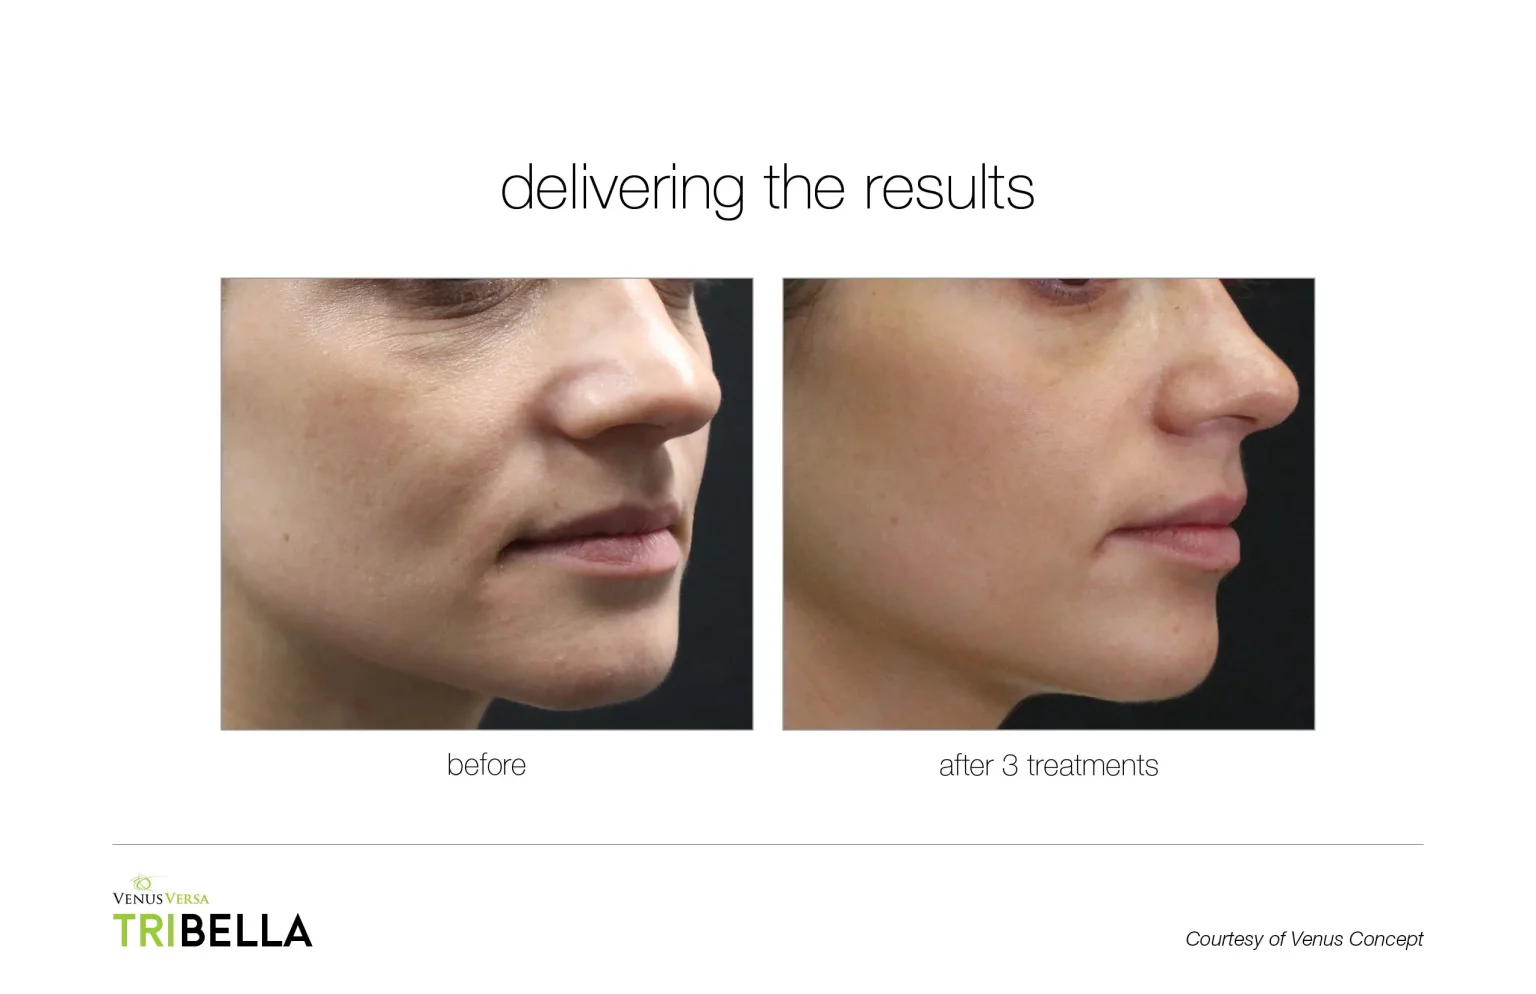 Before and after images of a woman who had the Tribella treatment